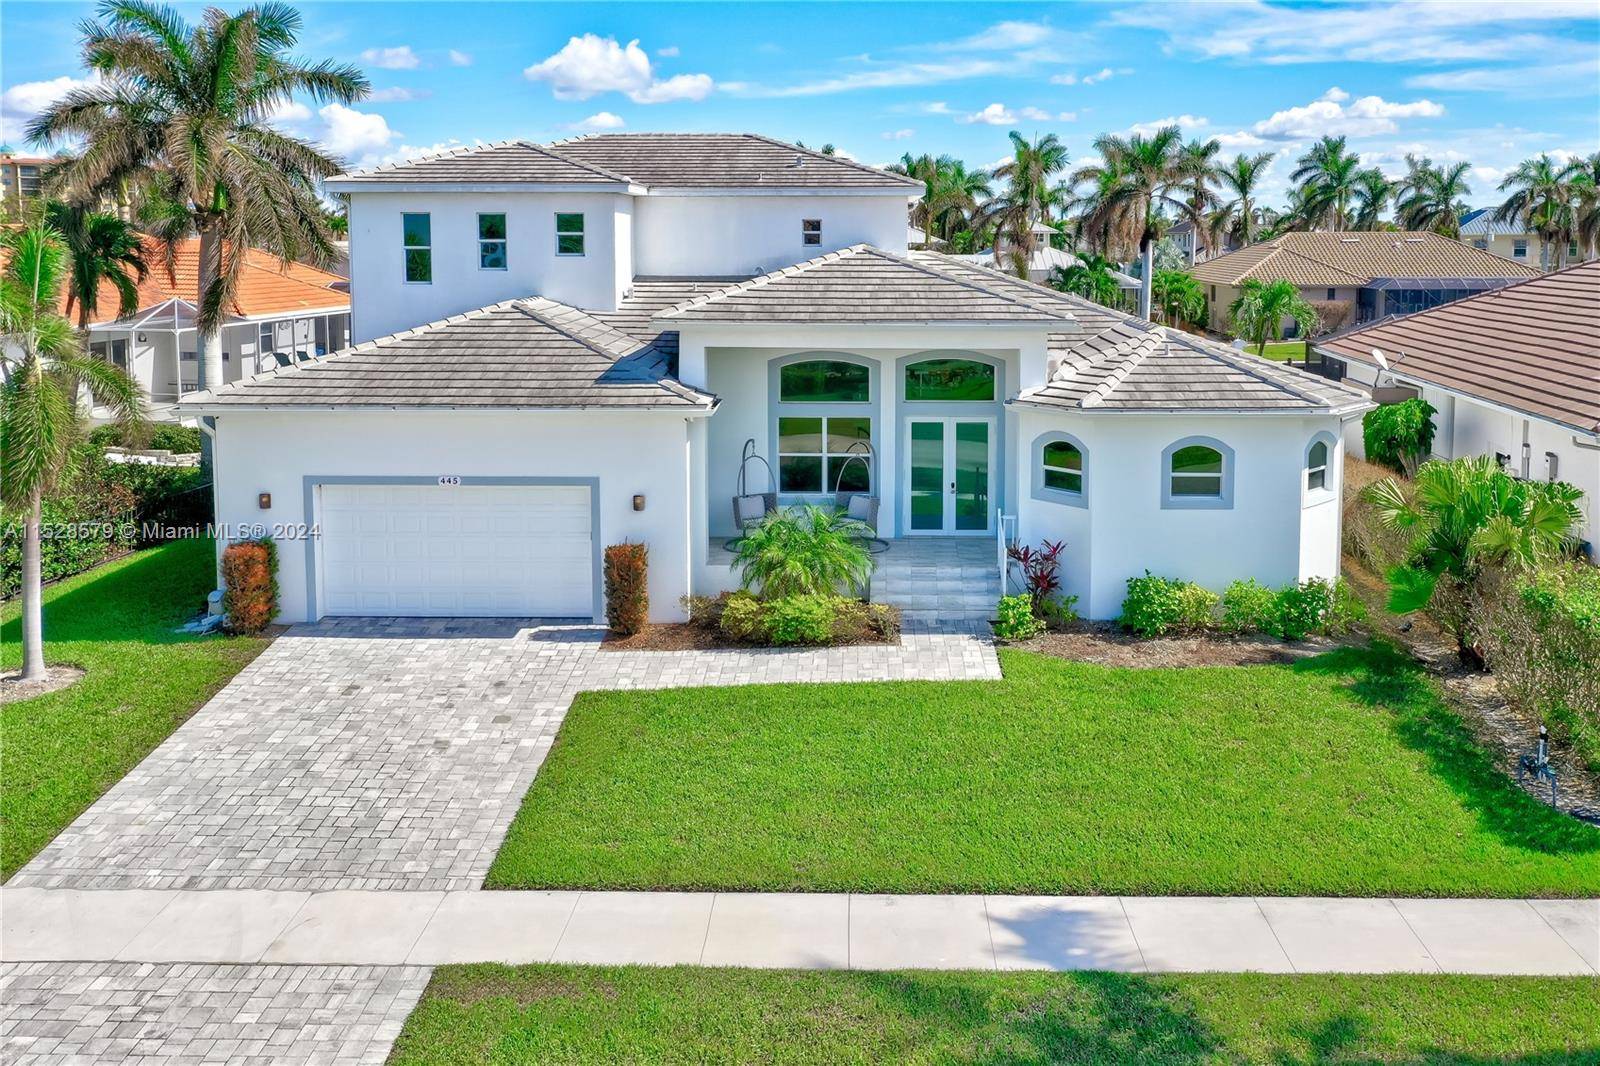 Gorgeous turnkey, high producing AirBnB on Marco Island.